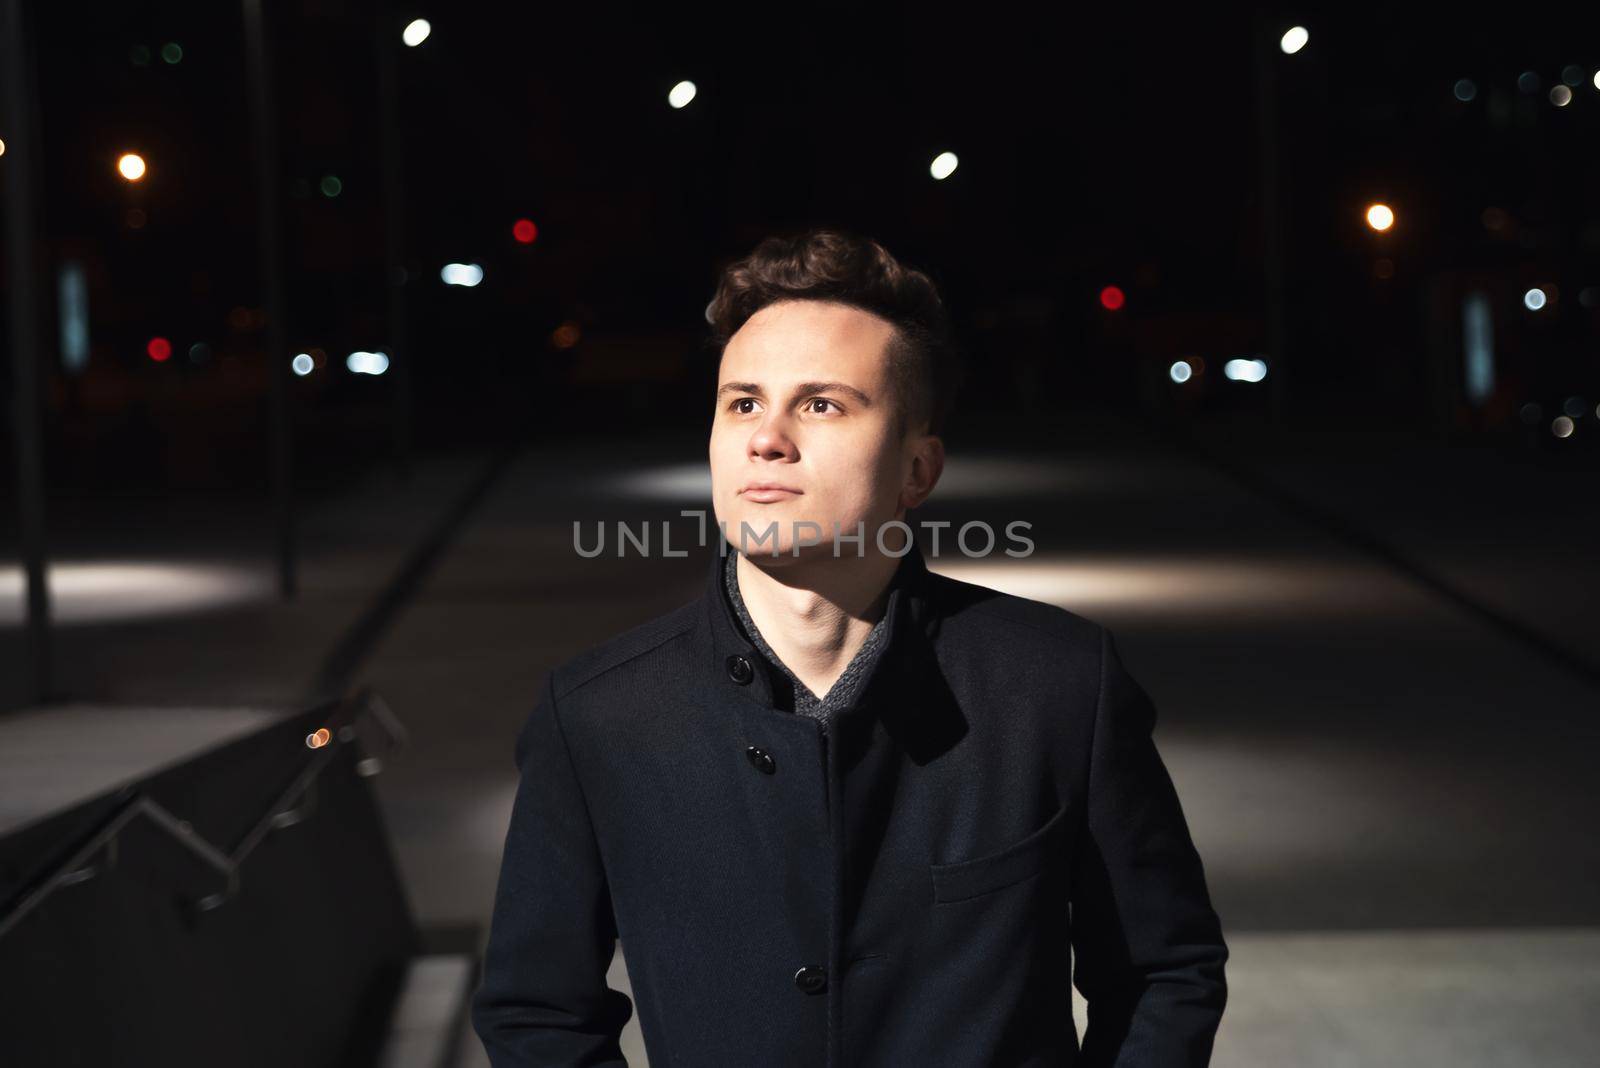 Night time image of confident young and handsome businessman walking along the street with cityscape in the background